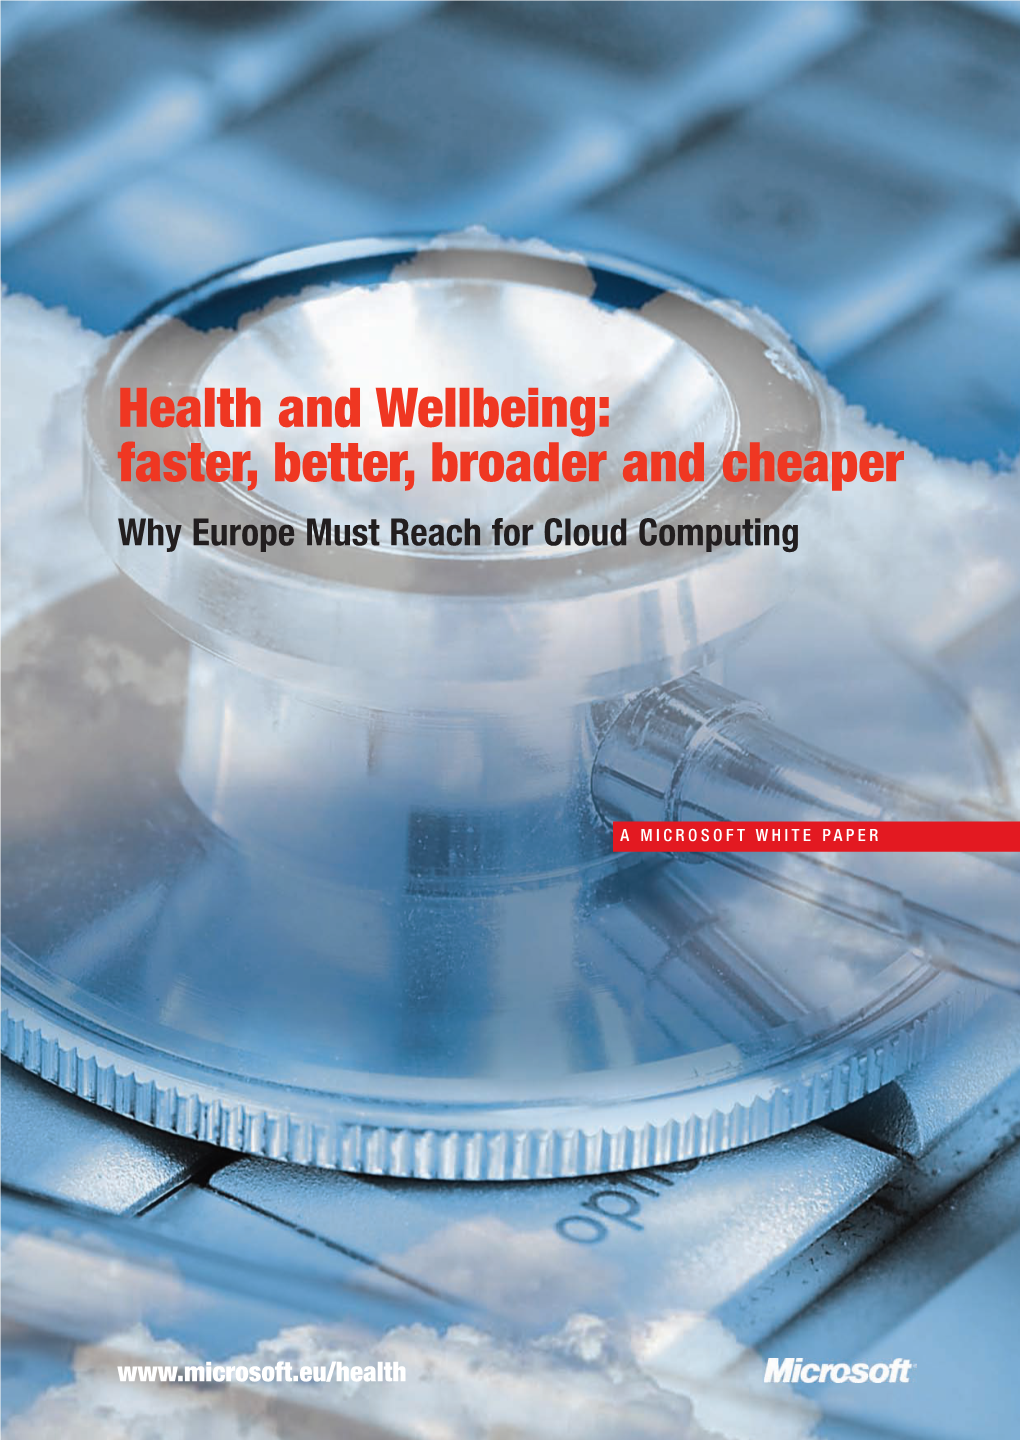 Health and Wellbeing: Faster, Better, Broader and Cheaper Why Europe Must Reach for Cloud Computing